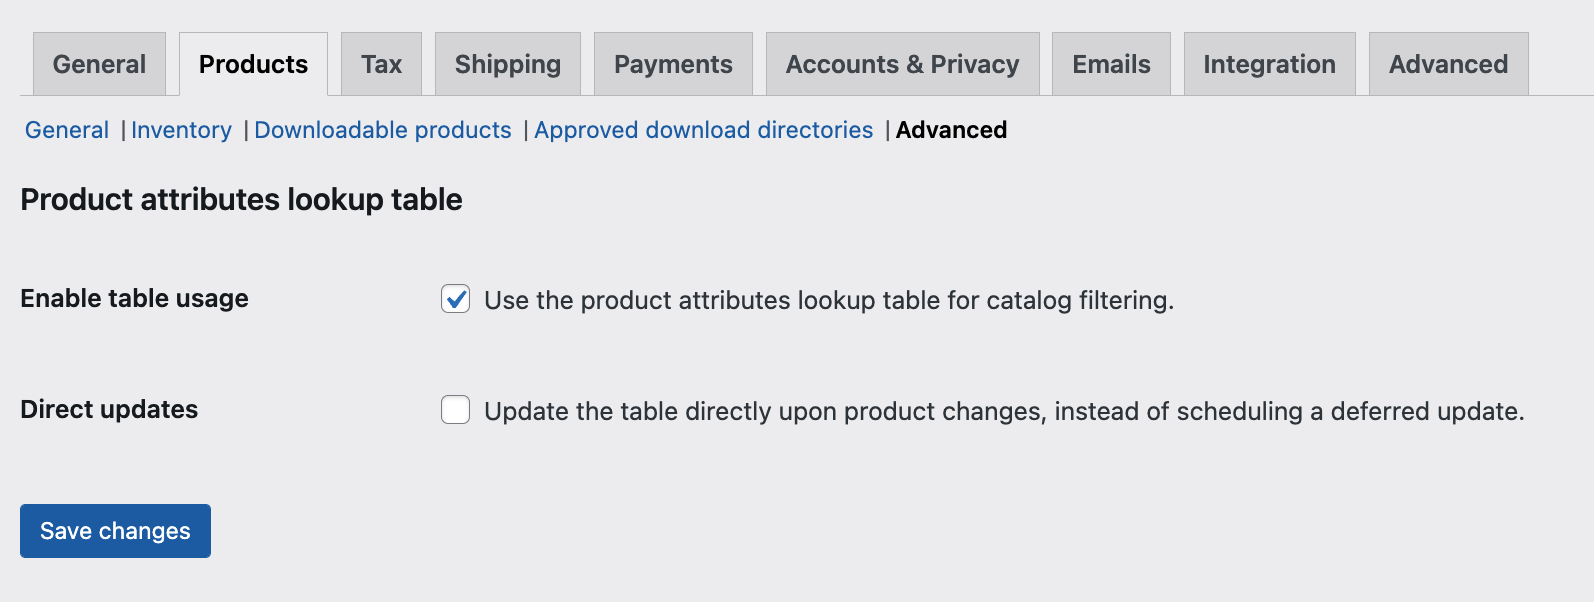 A view of the settings under WooCommerce > Settings > Products > Advanced. For most users the default settings will be fine and not needed to be tweaked. 